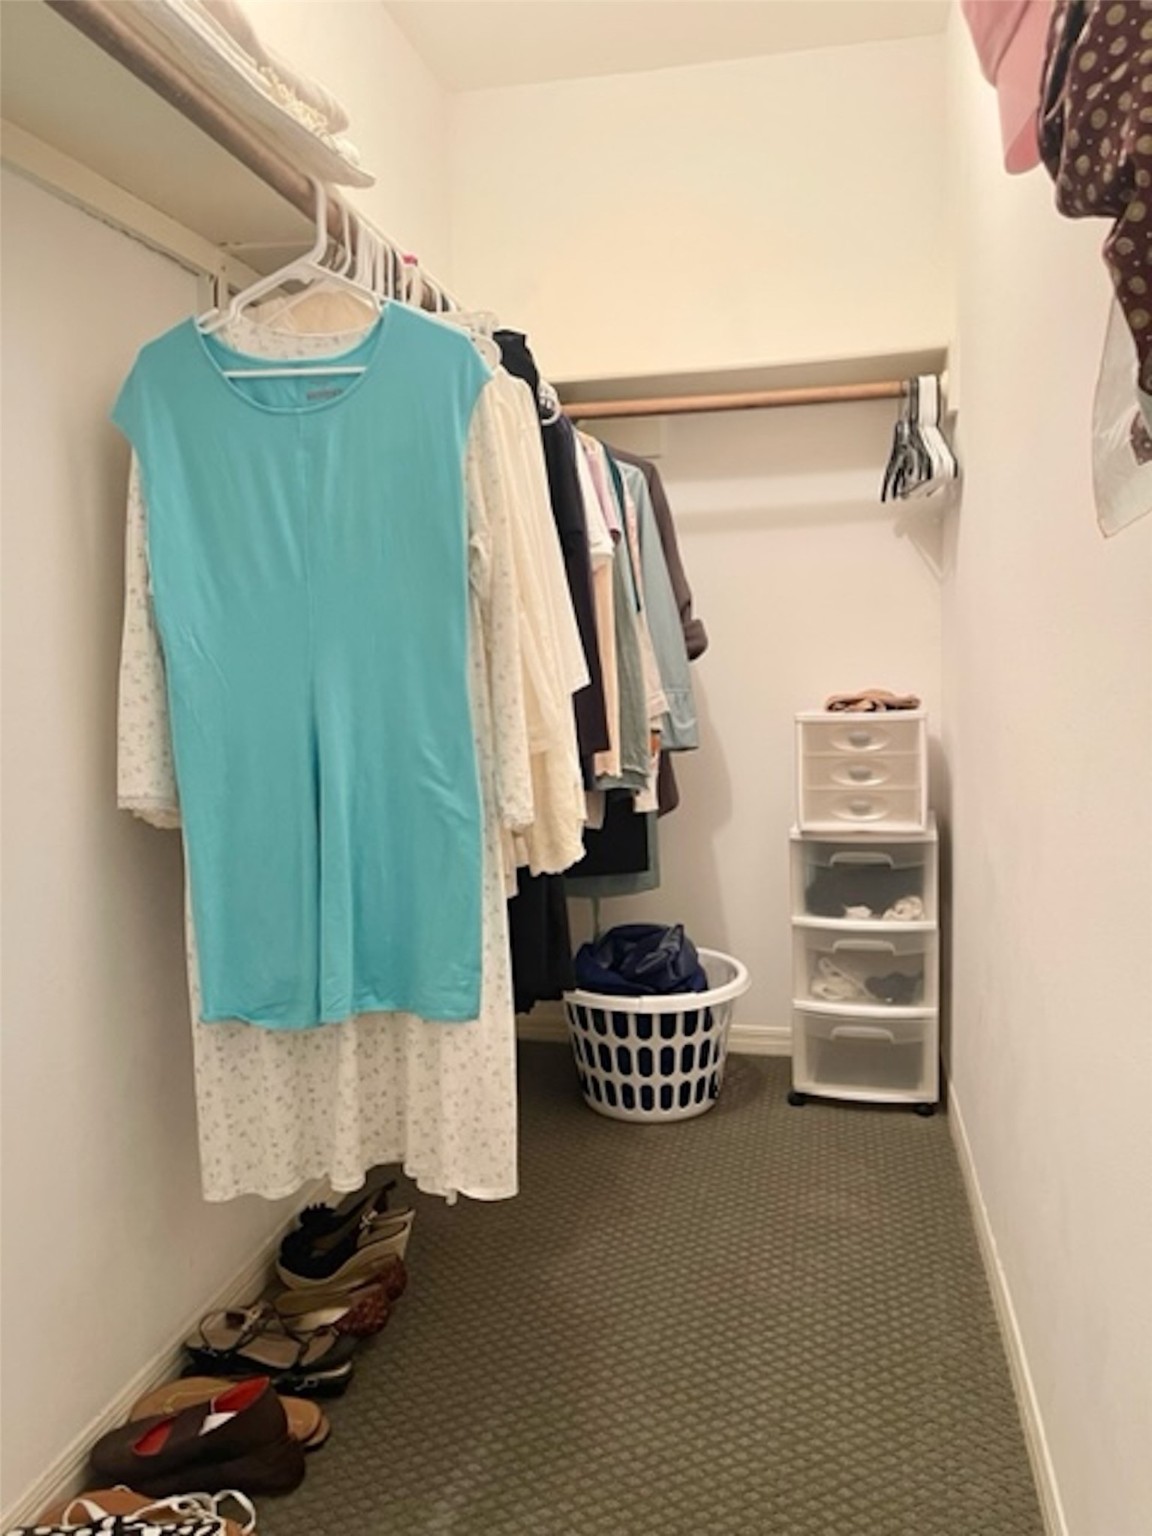 2nd of two closets